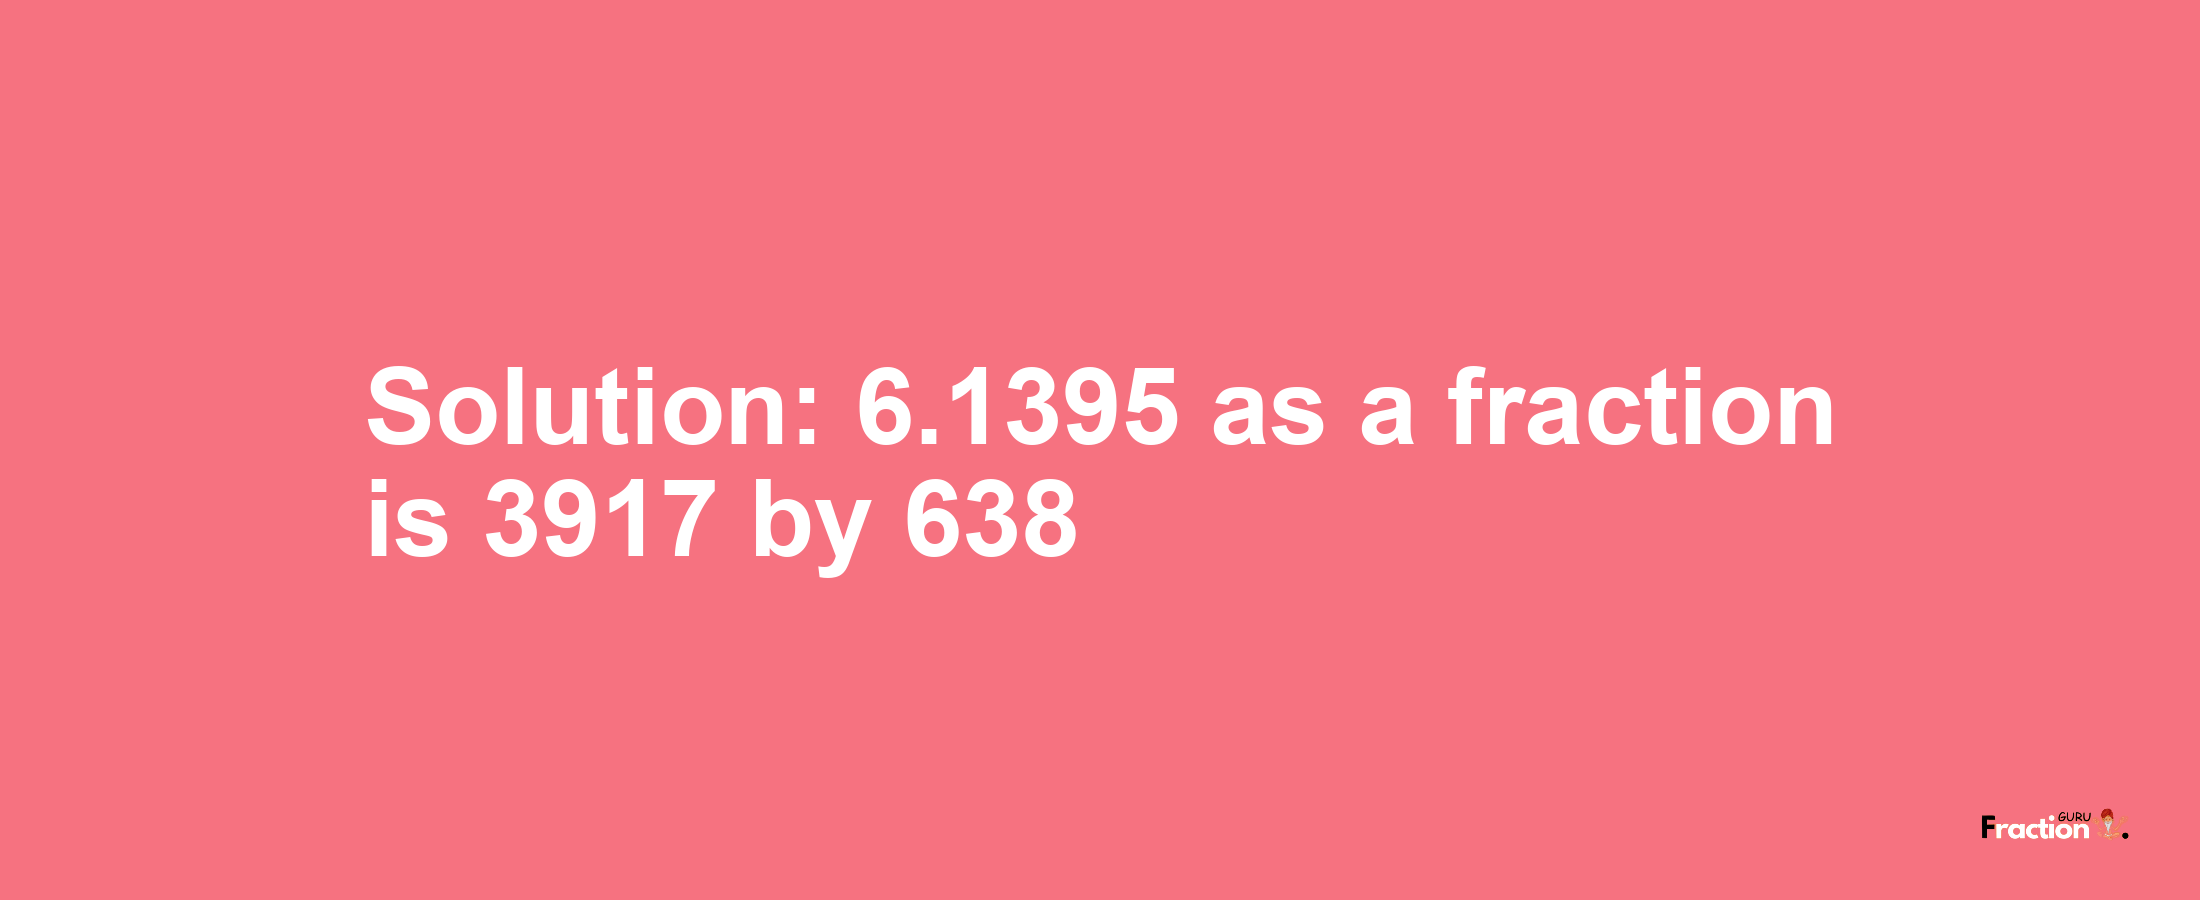 Solution:6.1395 as a fraction is 3917/638